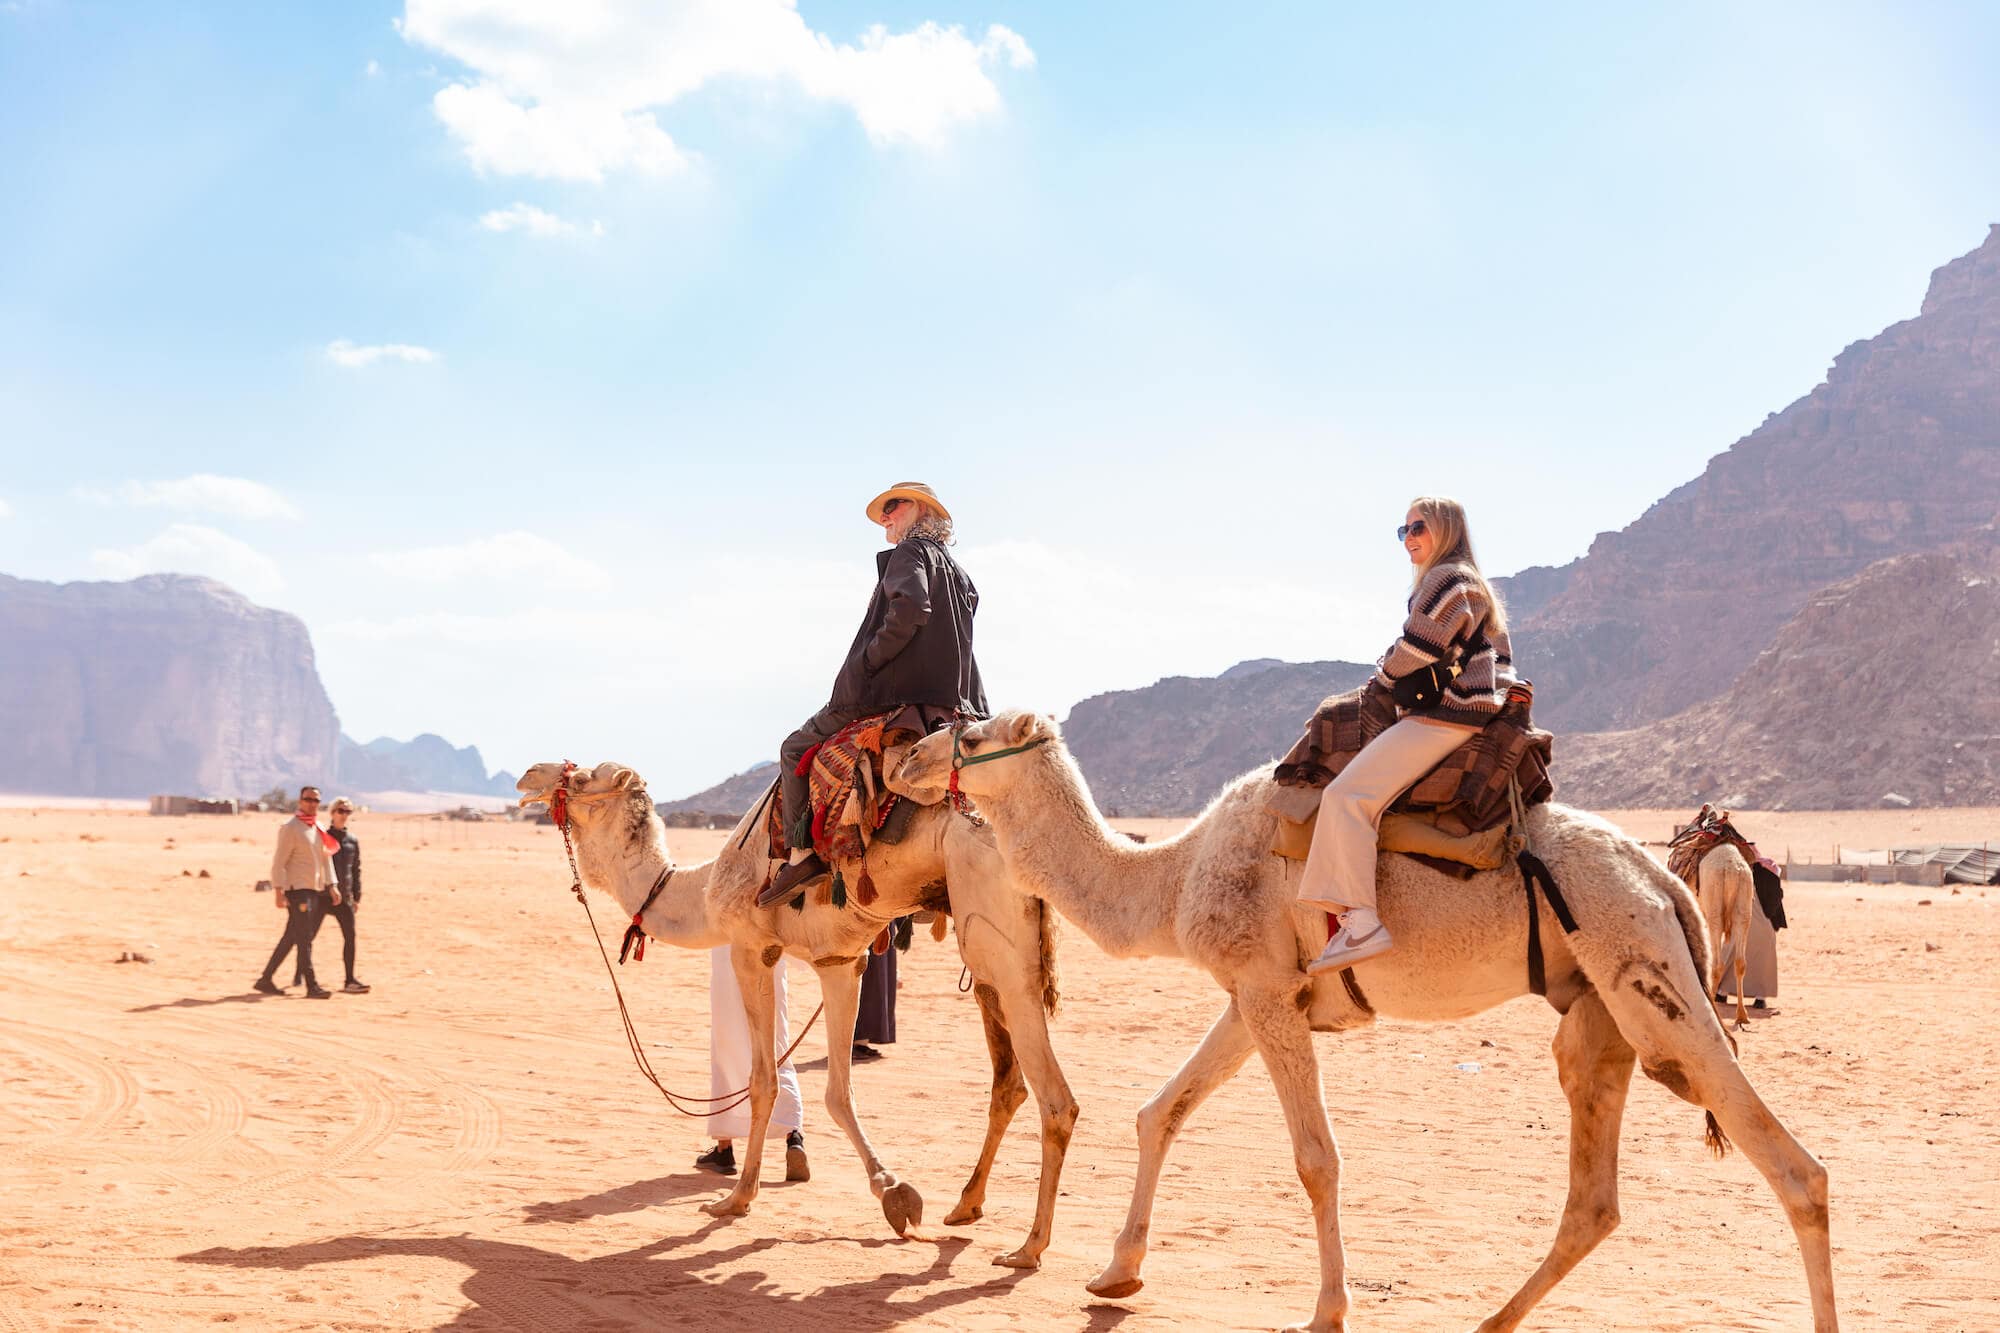 Two people ride camels over desert sand with jagged mountains in the background, while two more people pass by on foot in the middle distance.